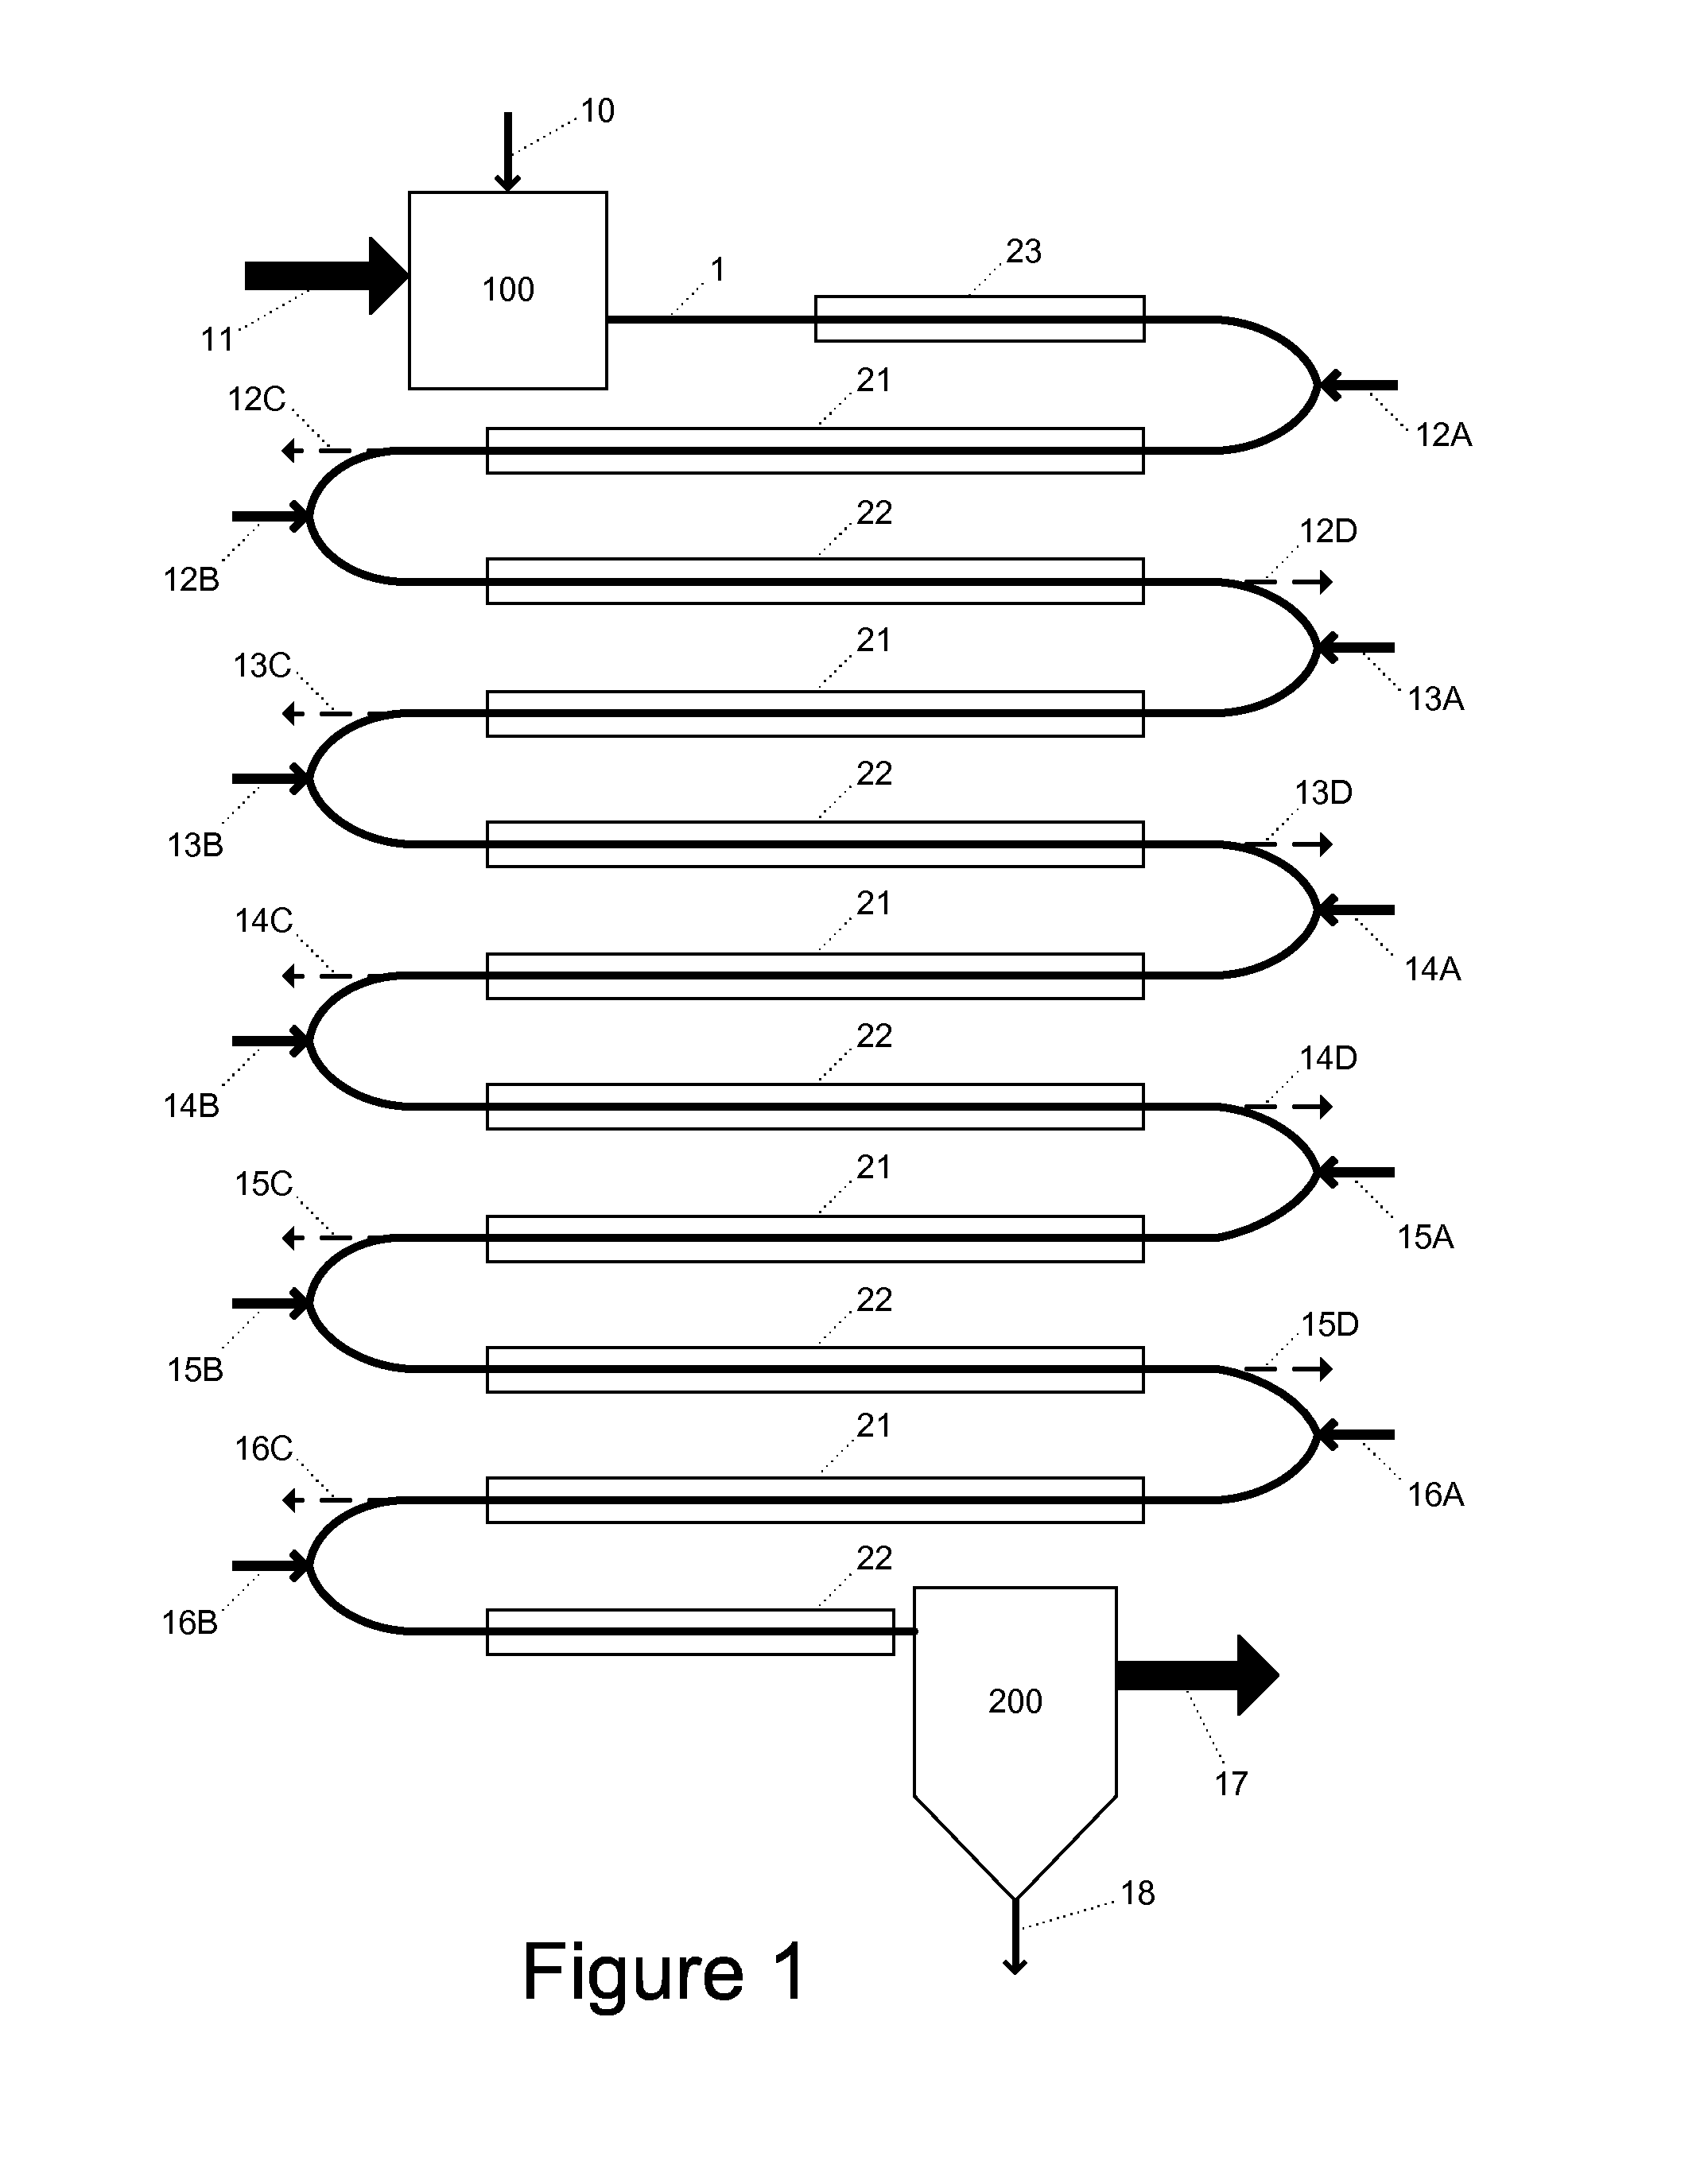 Apparatus and process for atomic or molecular layer deposition onto particles during pneumatic transport